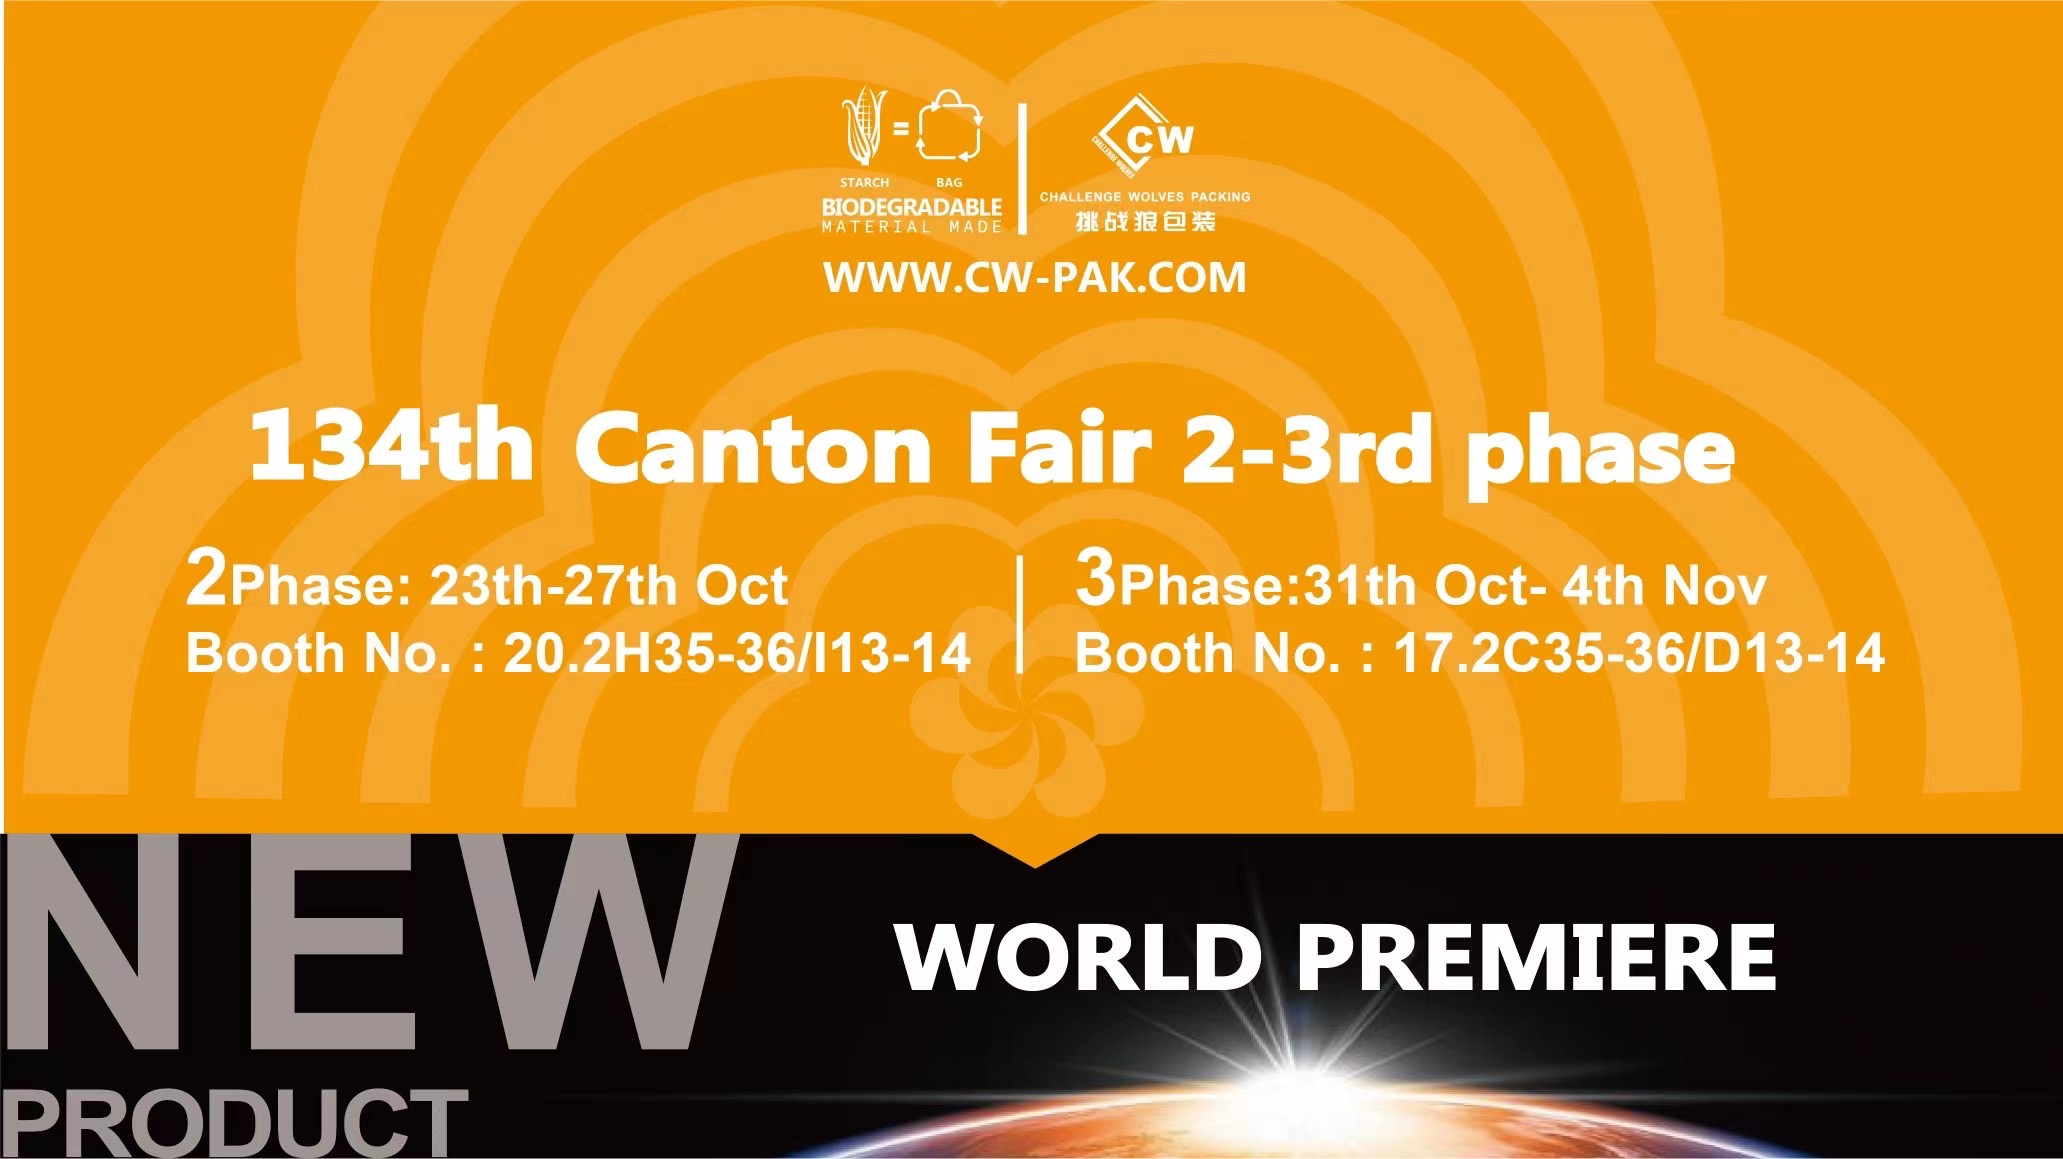 Welcome to 134th Canton Fair 2-3rd Phase 